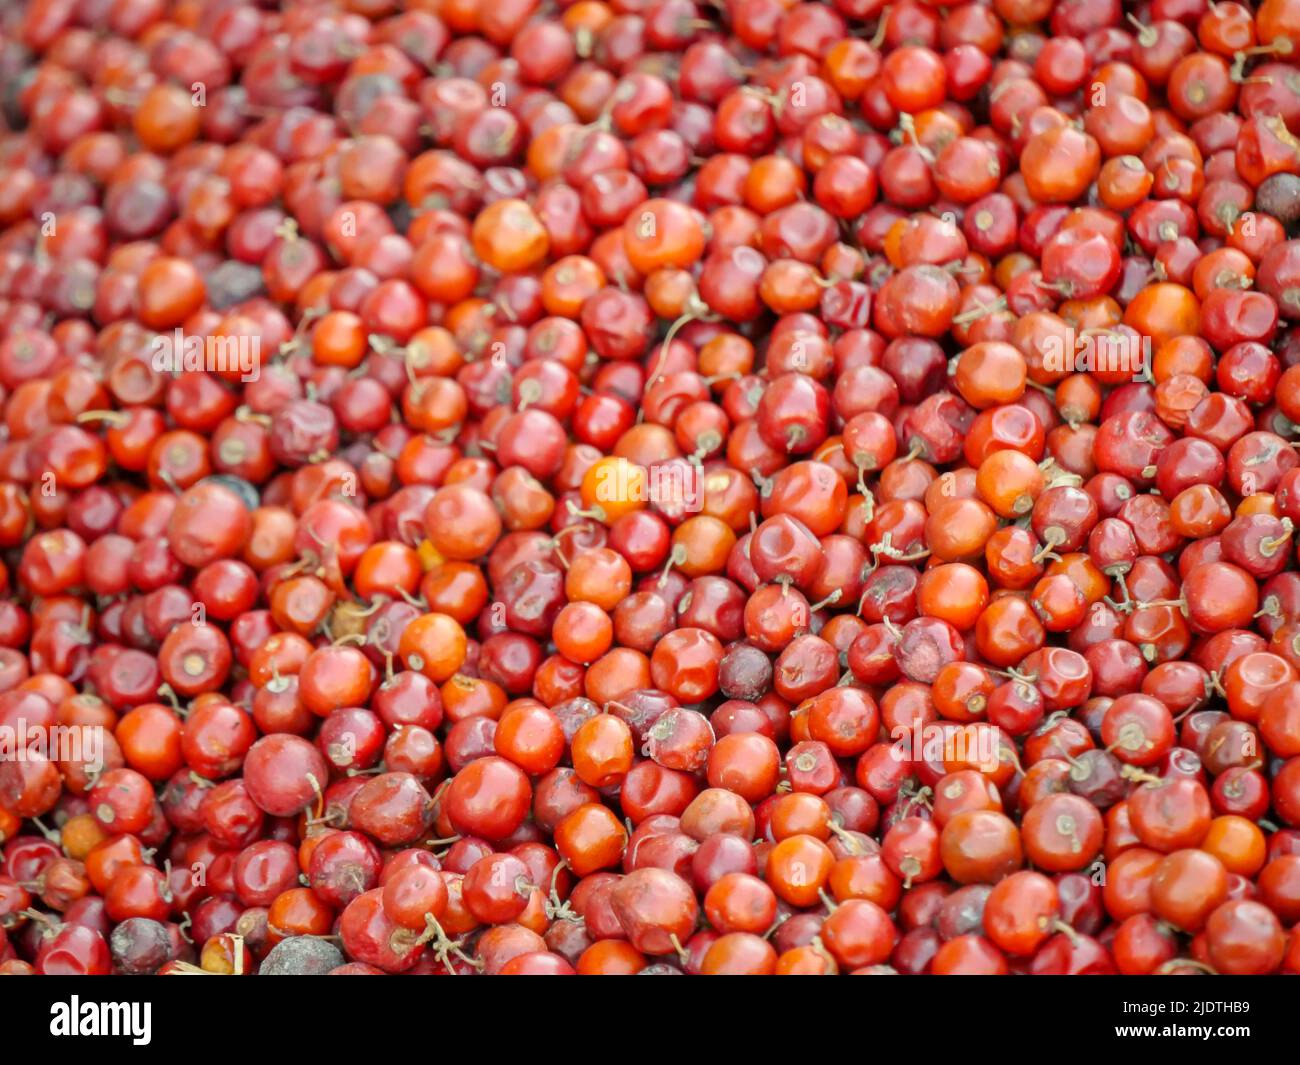 Heap of Red Indian jujube also known as Chinee apple, Chinese apple, jujube, Indian plum, masau, ber, cottony jujube, dungs Stock Photo